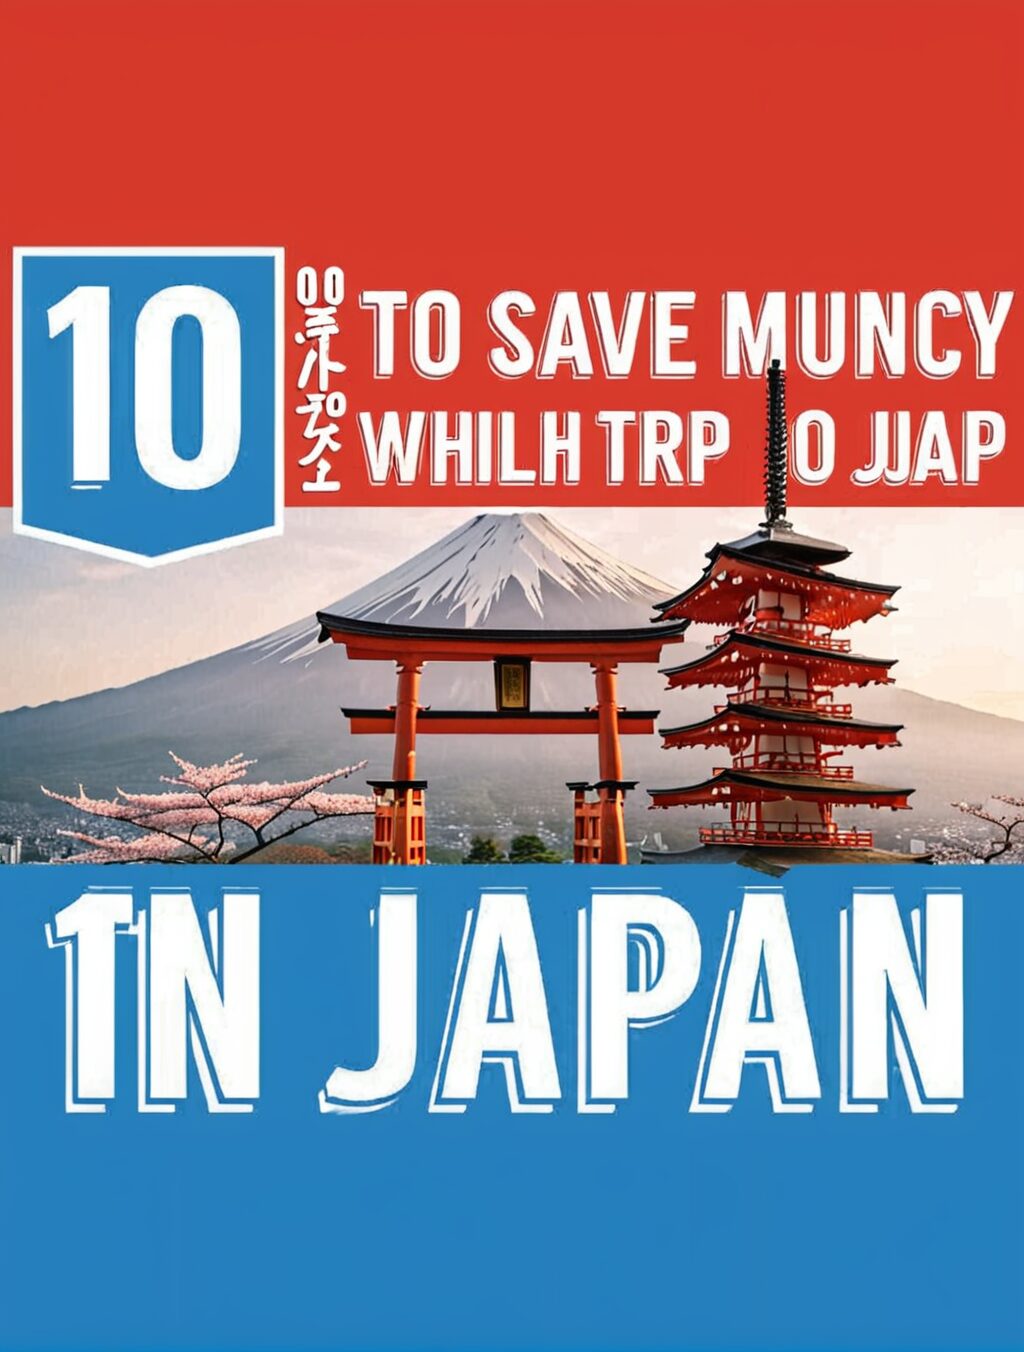 how much to save for trip to japan